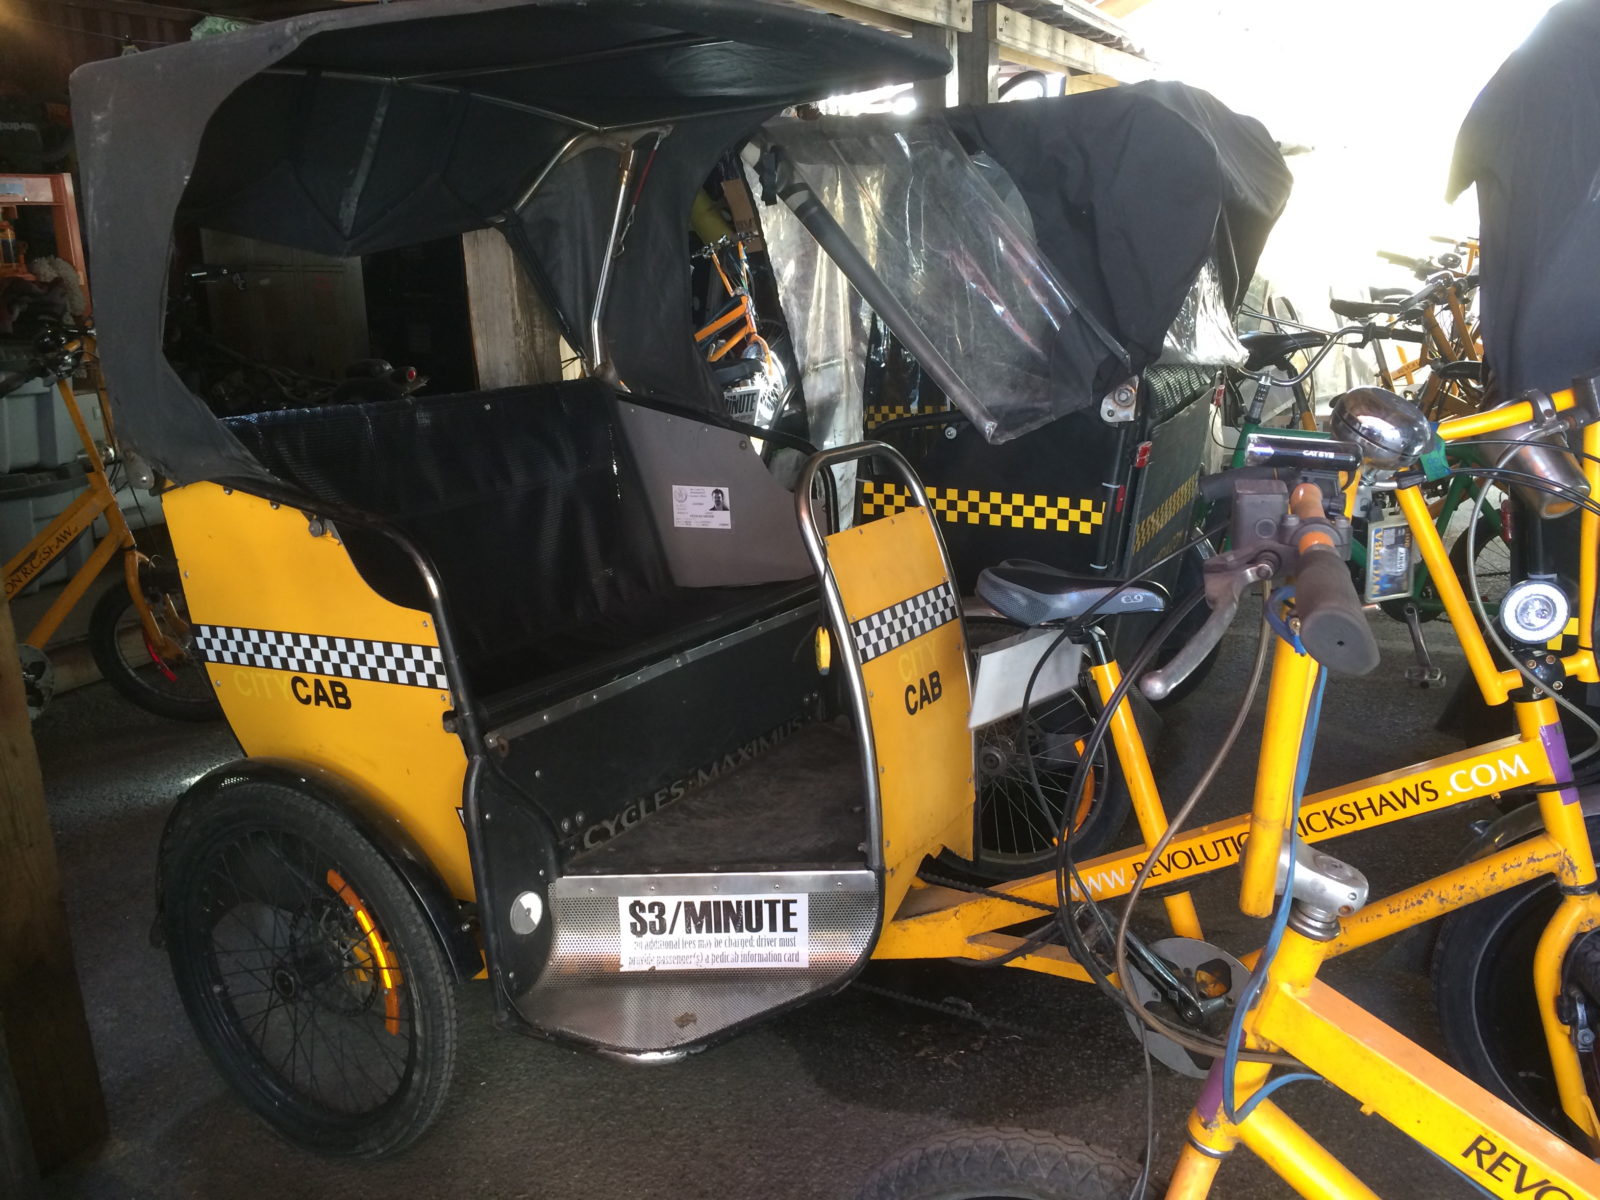 Pedicab NYC Services - How does it work? 